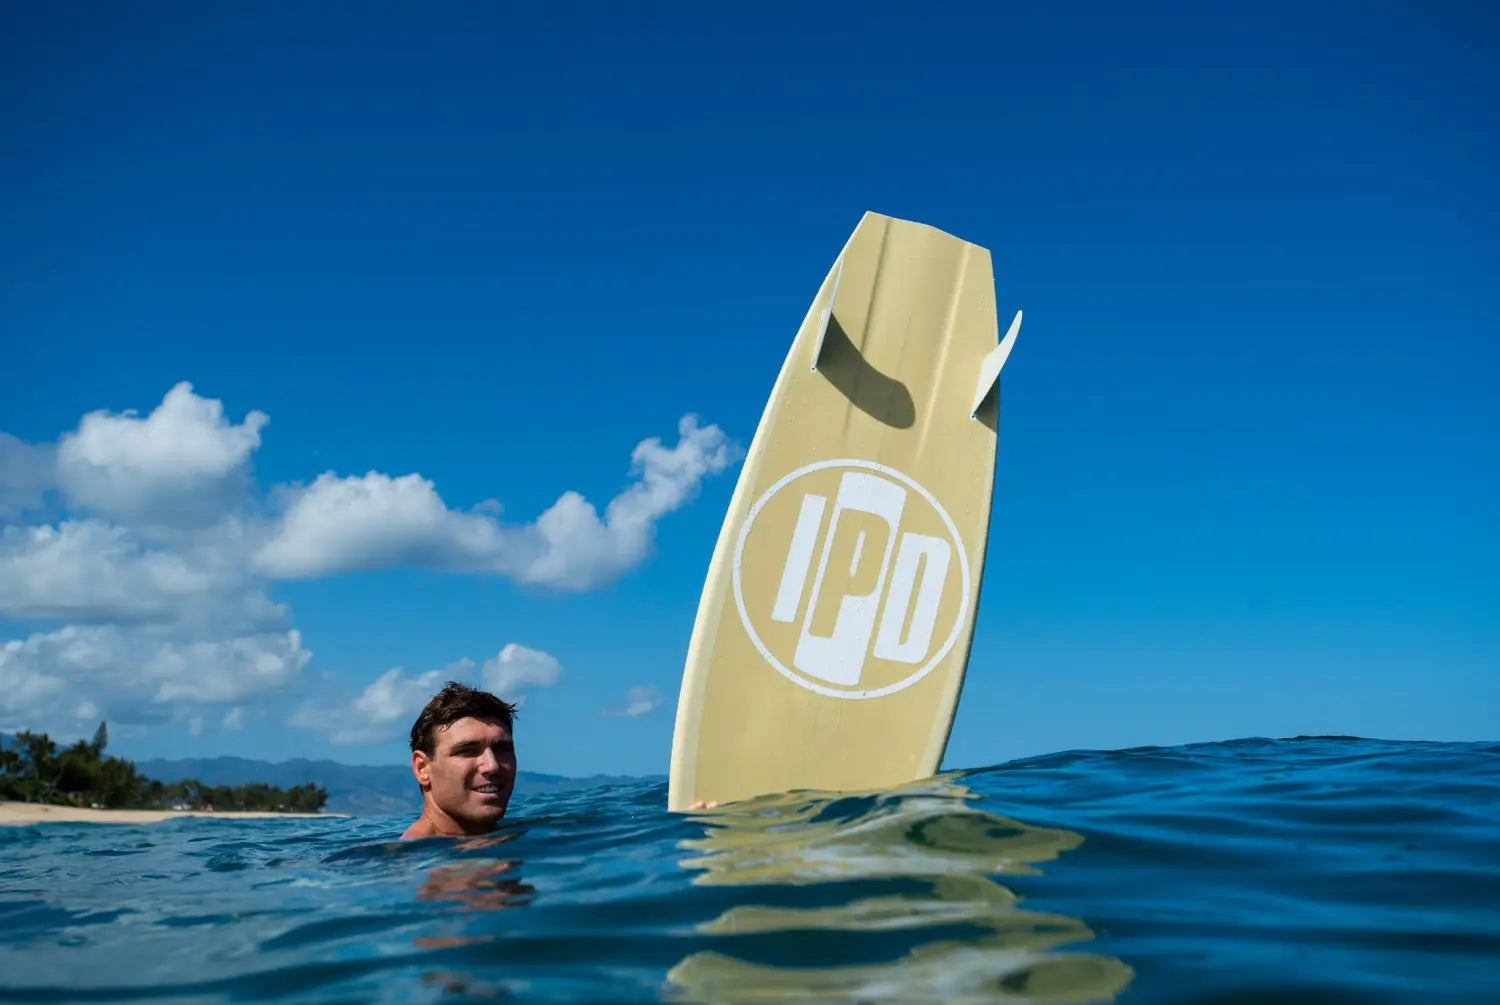 The Roots of IPD: How Bob and Bill Hurley Revamped an Idea from the 1980s and Turned It Into Surfing’s Newest Old Brand